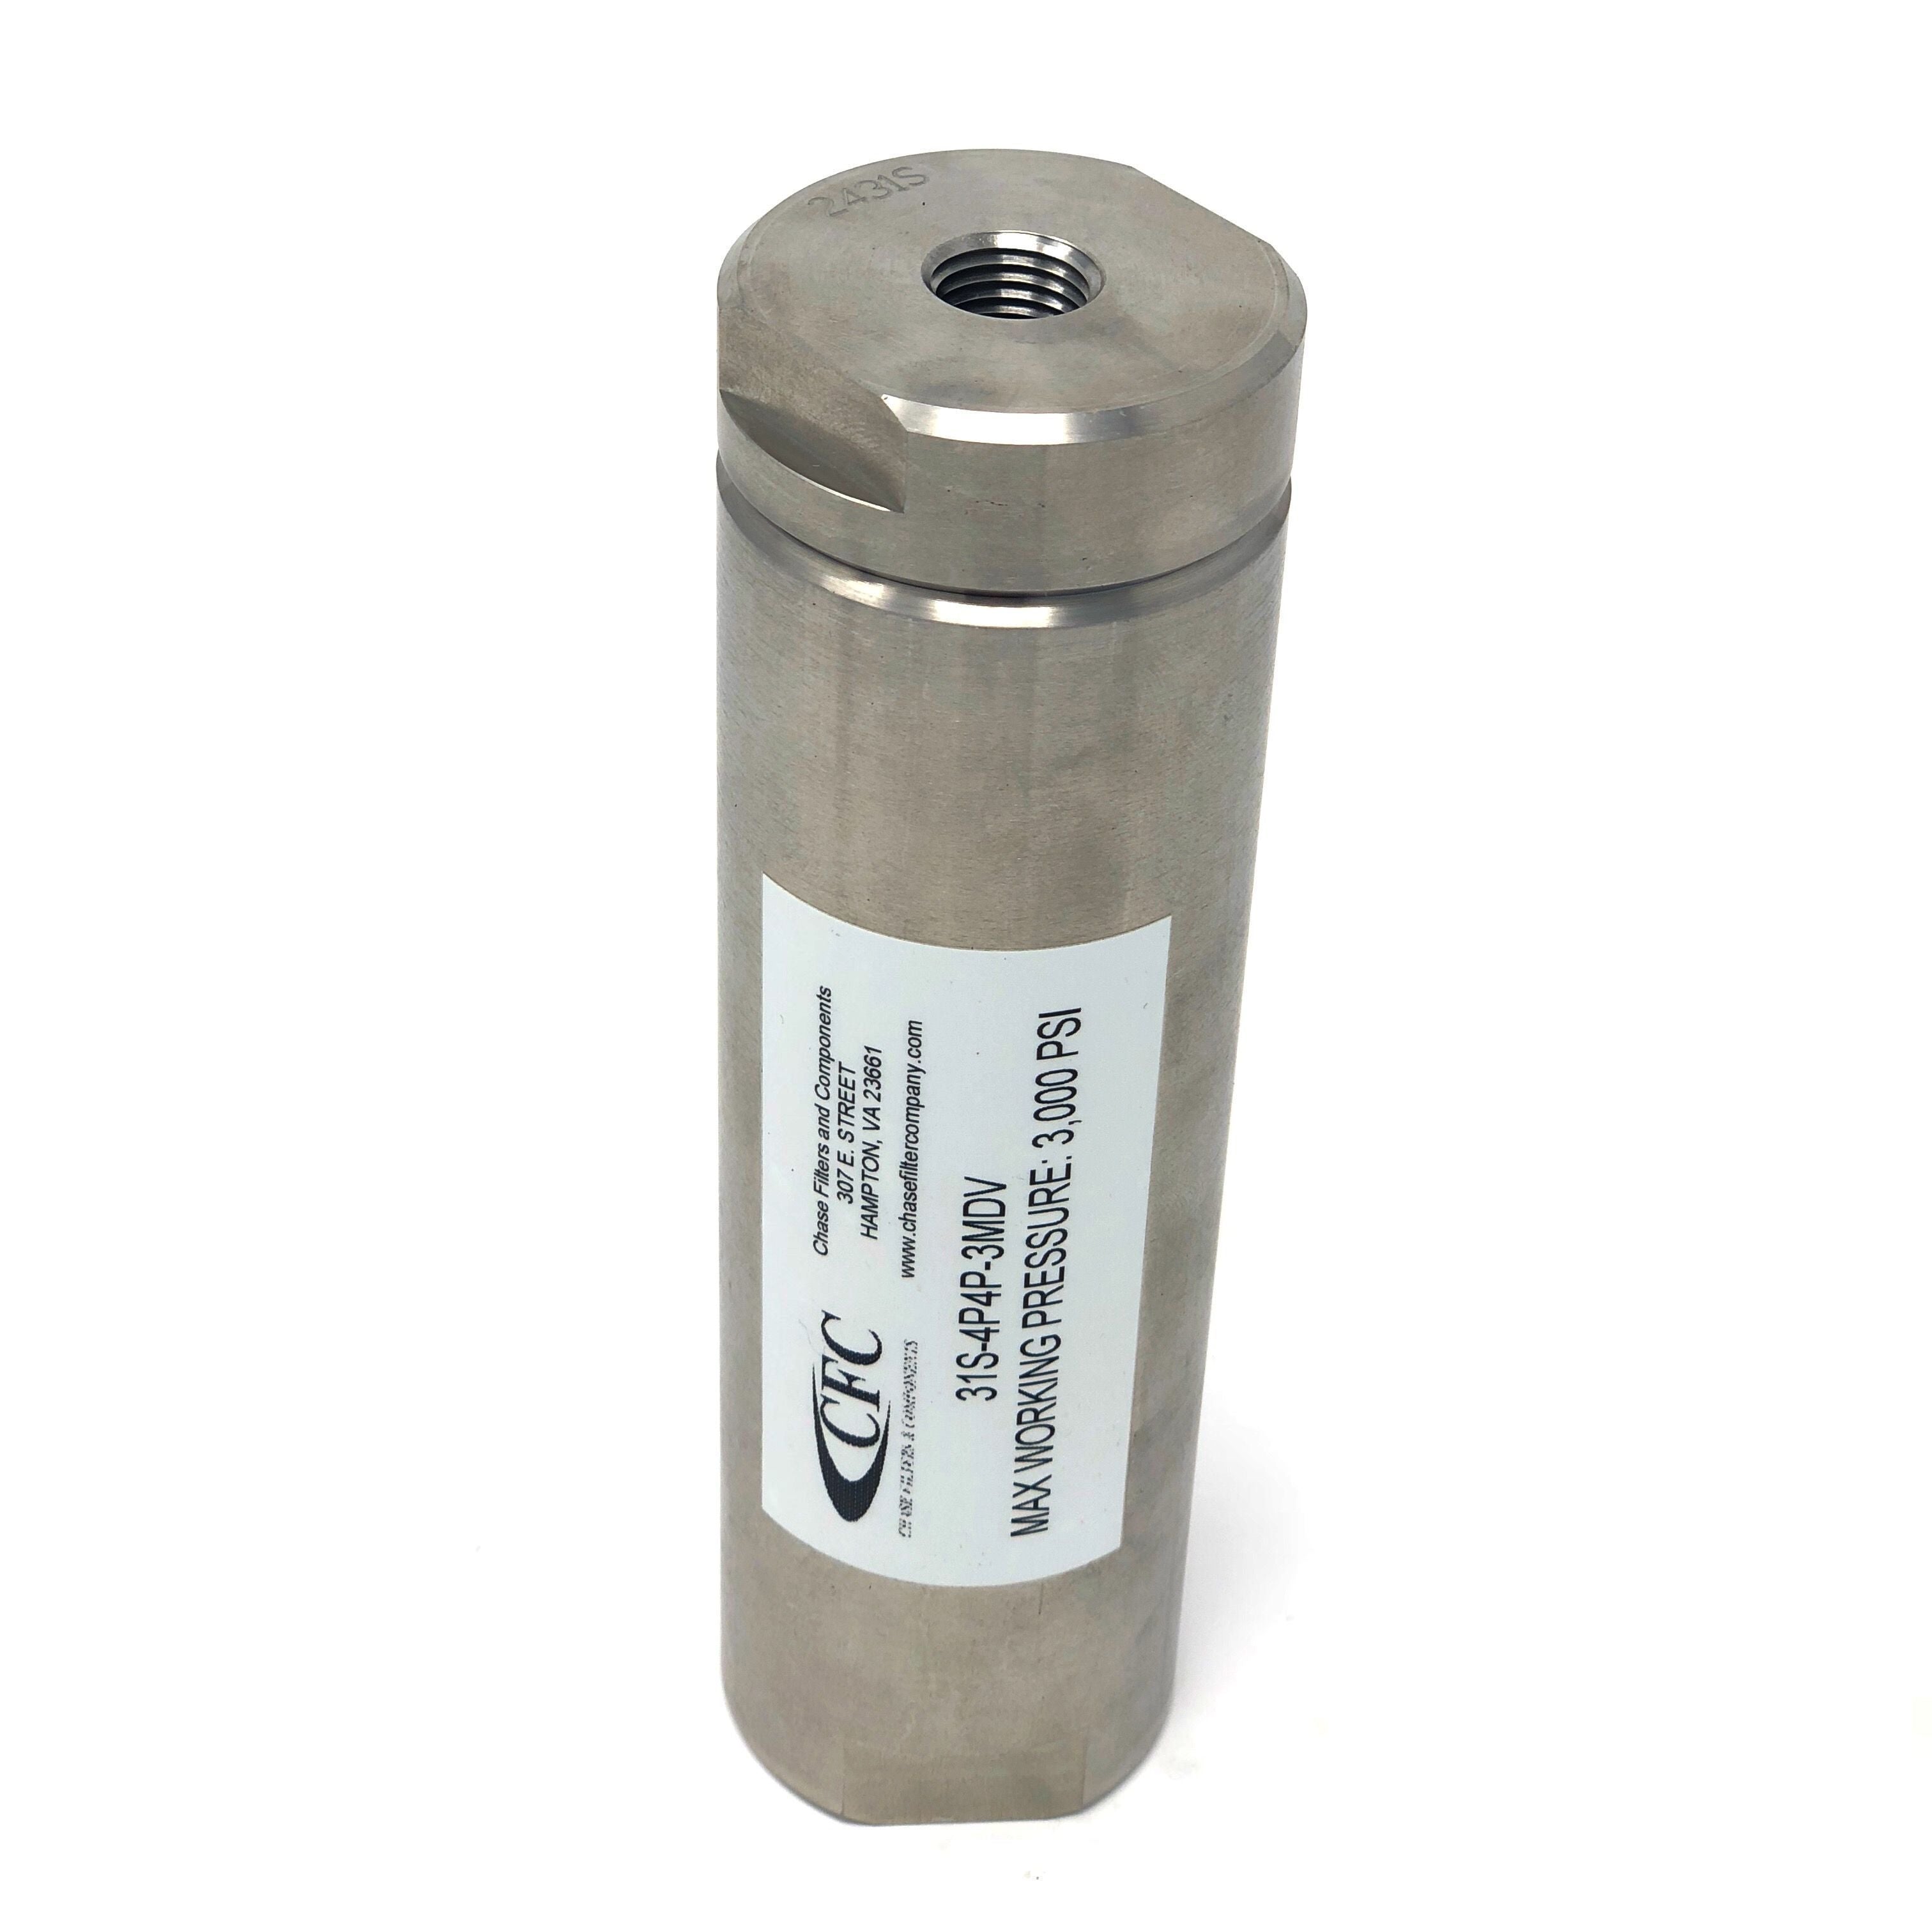 31S-8N8N-18SN : Chase High Pressure Inline Filter, 3000psi, 1/2" NPT, 18 Micron, No Visual Indicator, No Bypass